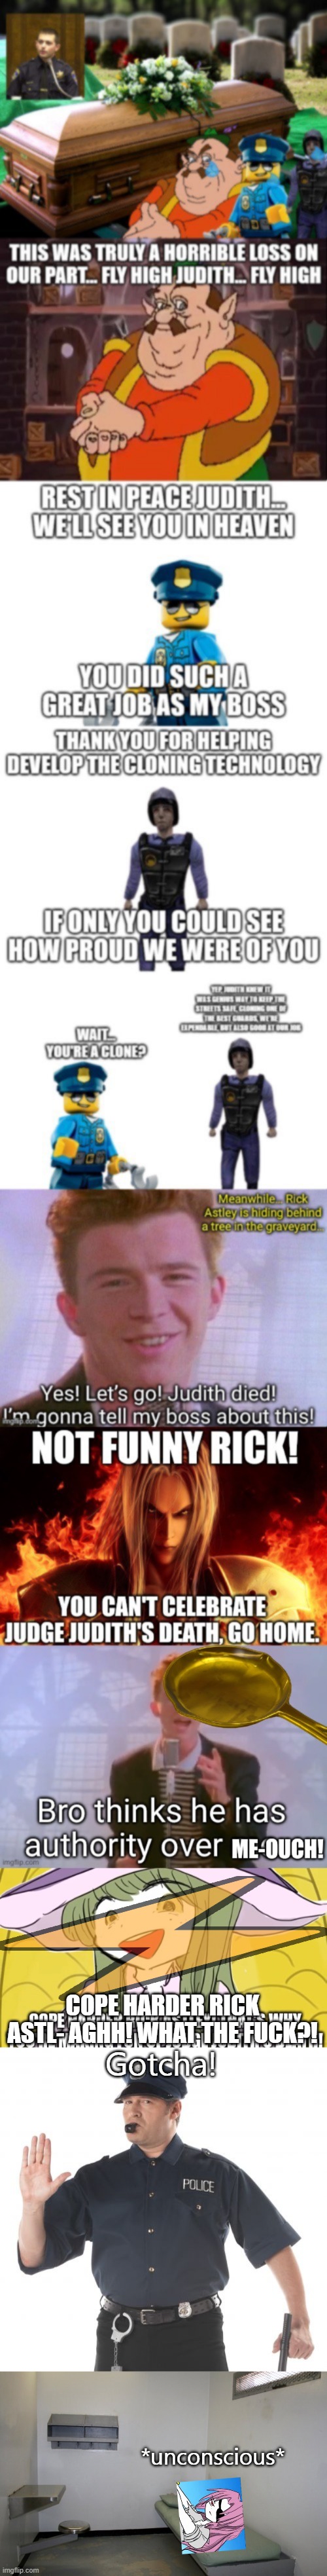 Yorihime goes to Wheatley Supermax Penitentiary | COPE HARDER RICK ASTL- AGHH! WHAT THE FUCK?! Gotcha! *unconscious* | image tagged in memes,stop cop,prison cell inside | made w/ Imgflip meme maker